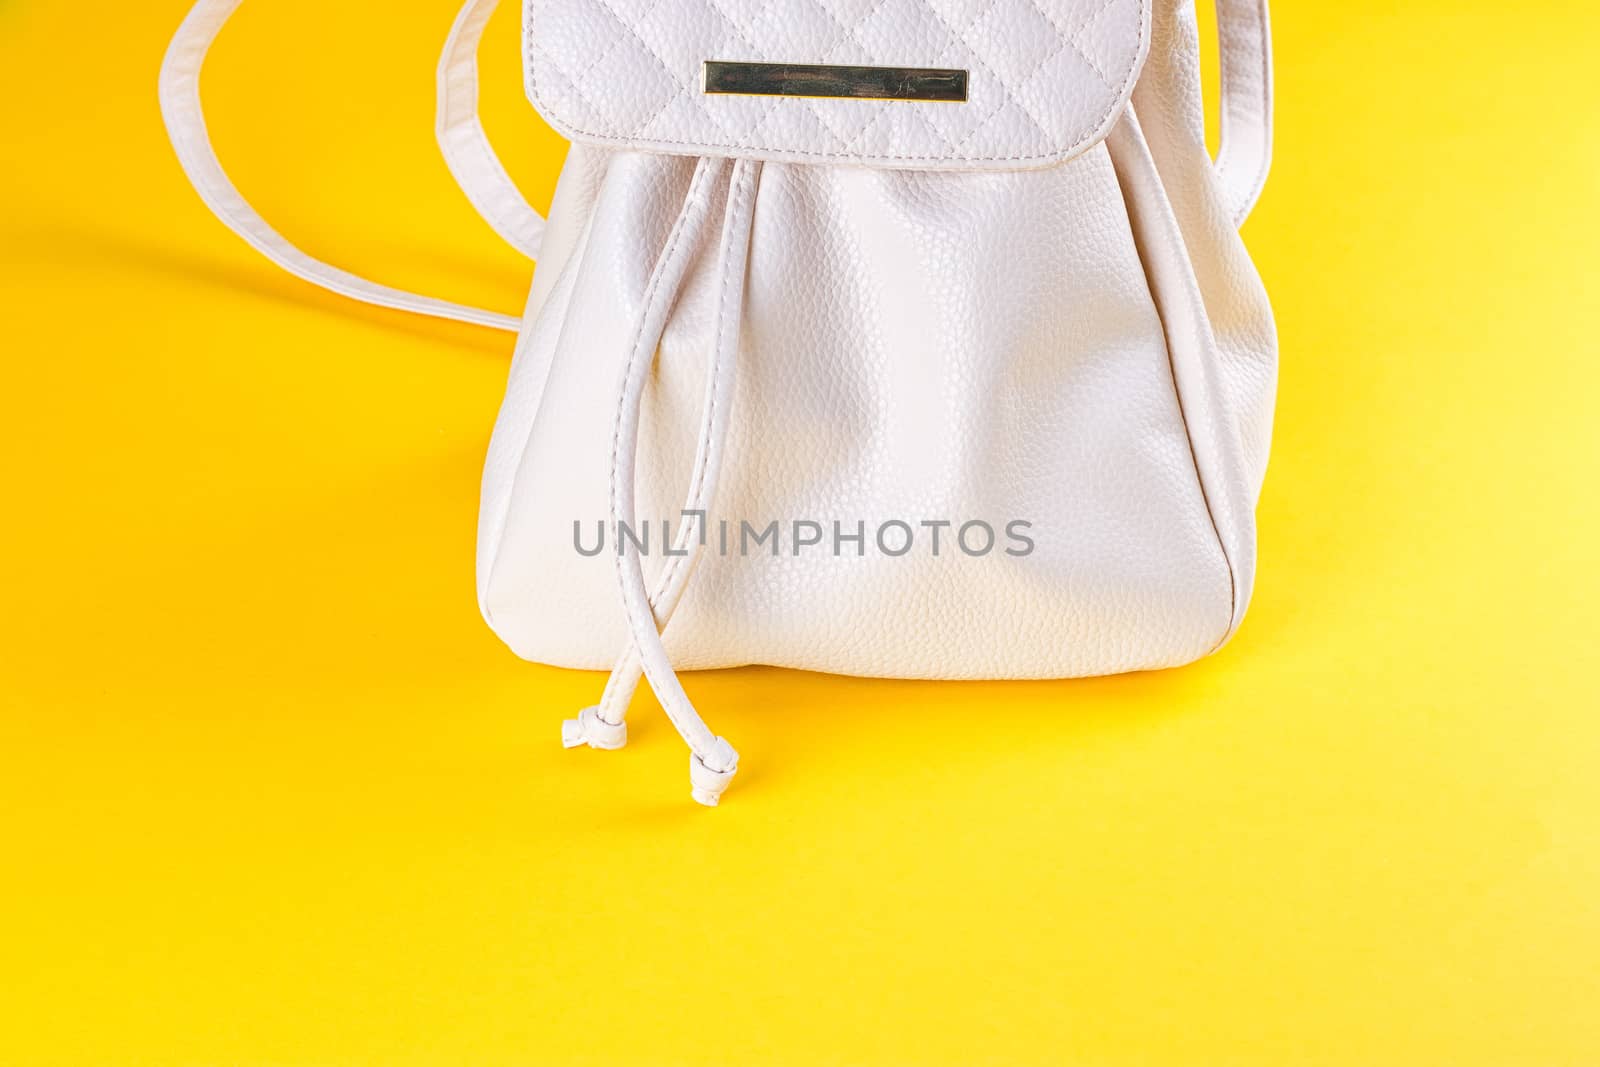 The female white leather backpack on a yellow background